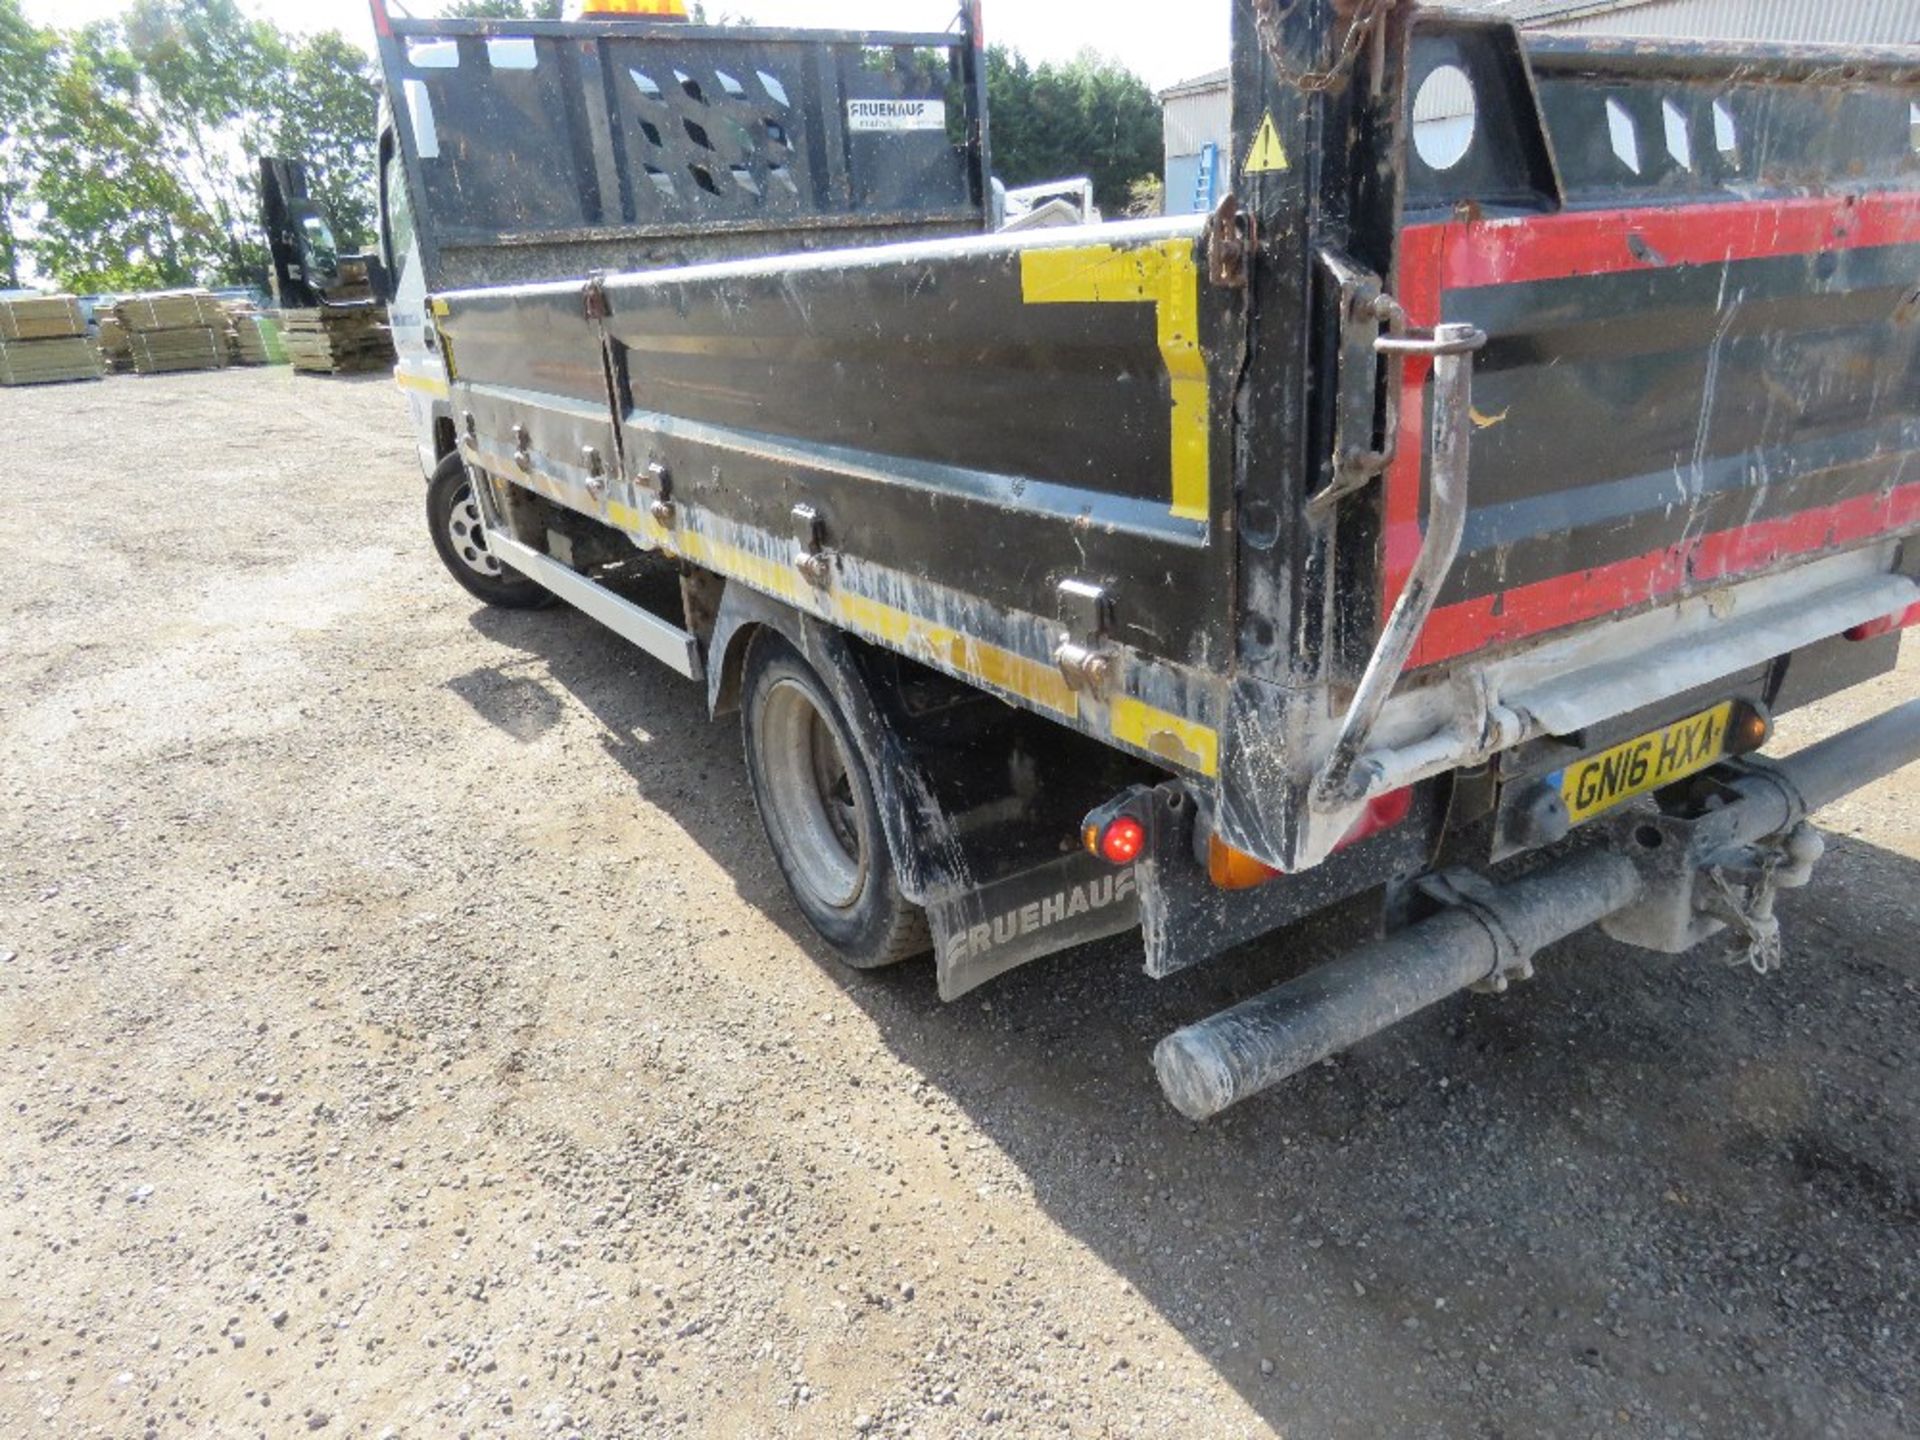 MITSUBISHI CANTER FUSO 7C15 7500KG TIPPER LORRY REG:GN16 HXA. DIRECT FROM LOCAL COMPANY WHO HAVE OWN - Image 12 of 19